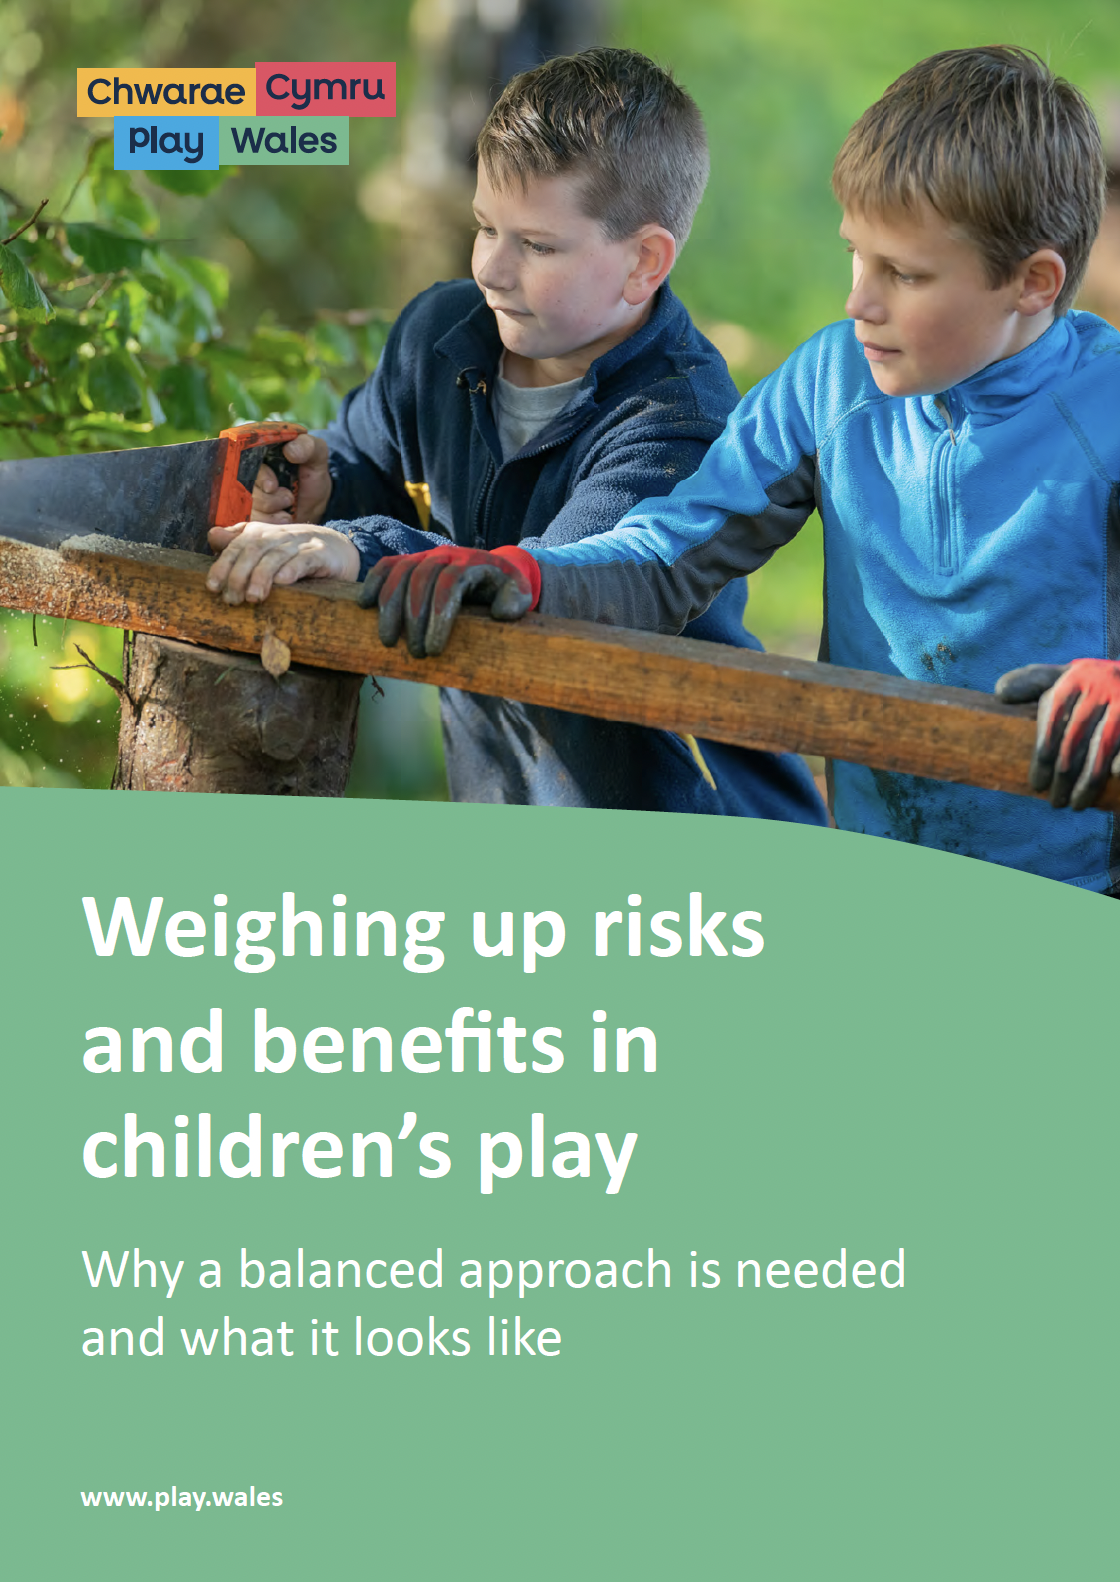 Weighing up risks and benefits in children’s play